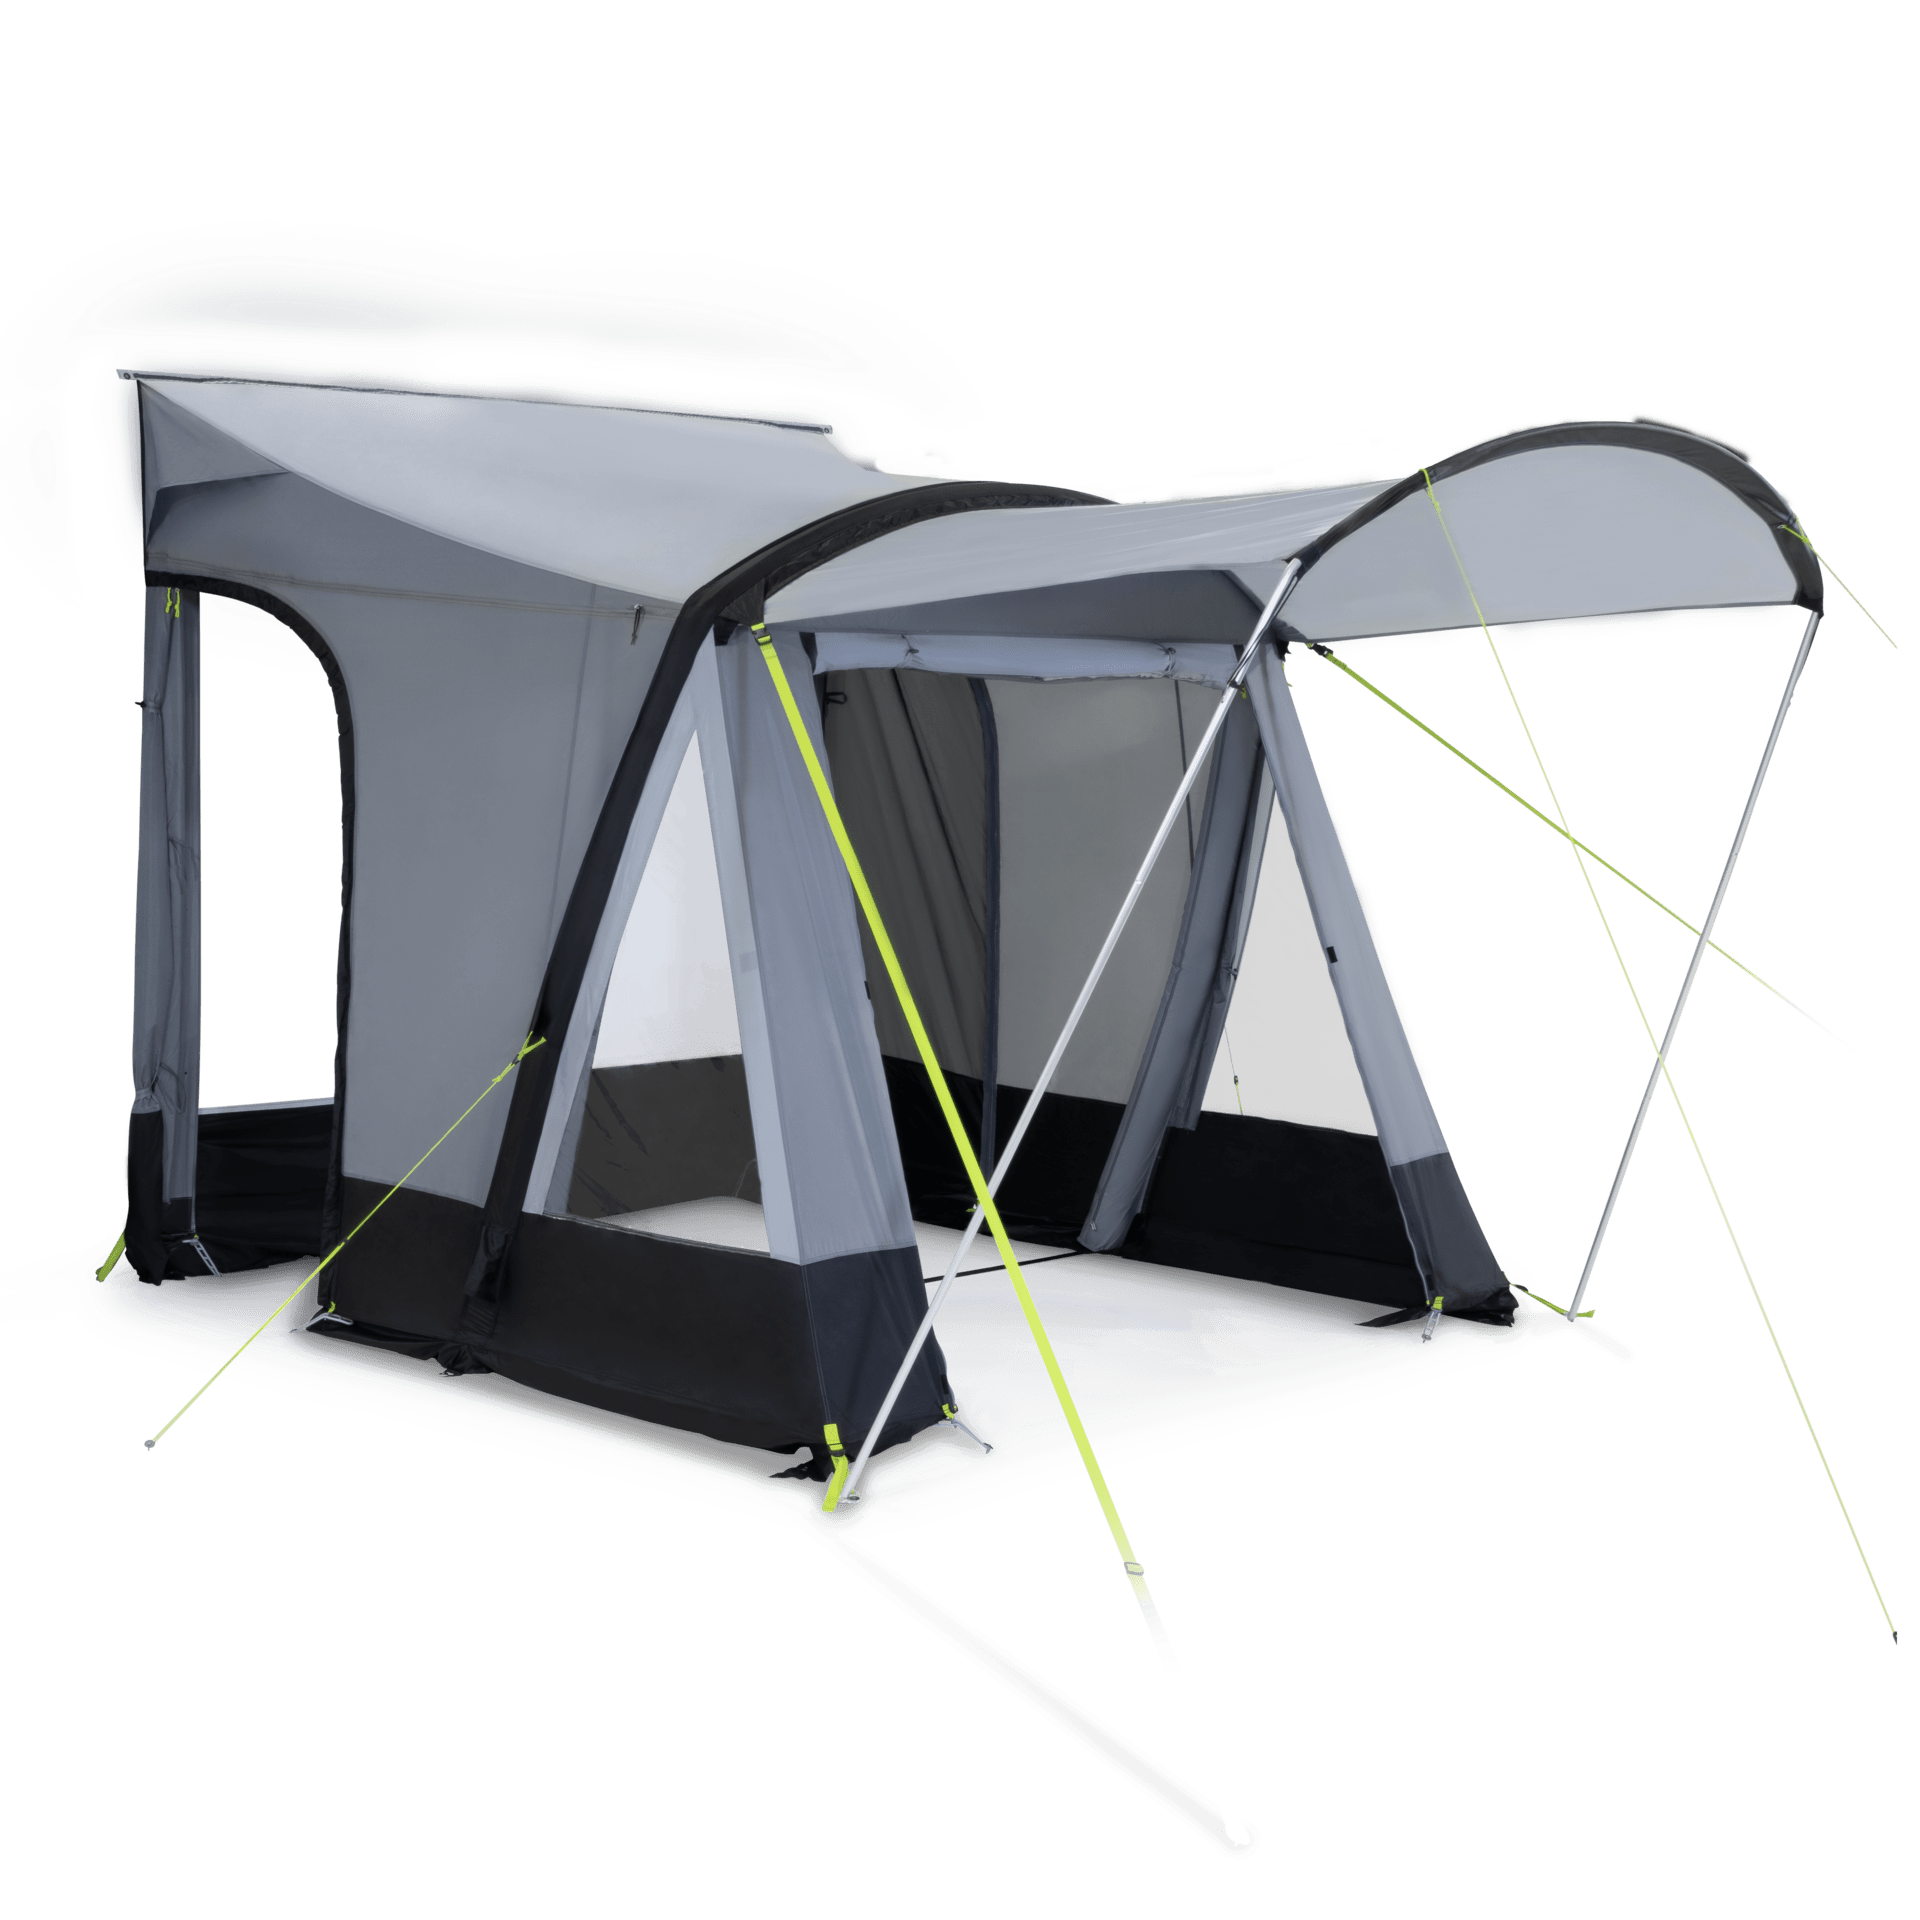 Dometic Leggera AIR 260 Canopy - Inflatable awning canopy | Dometic ...